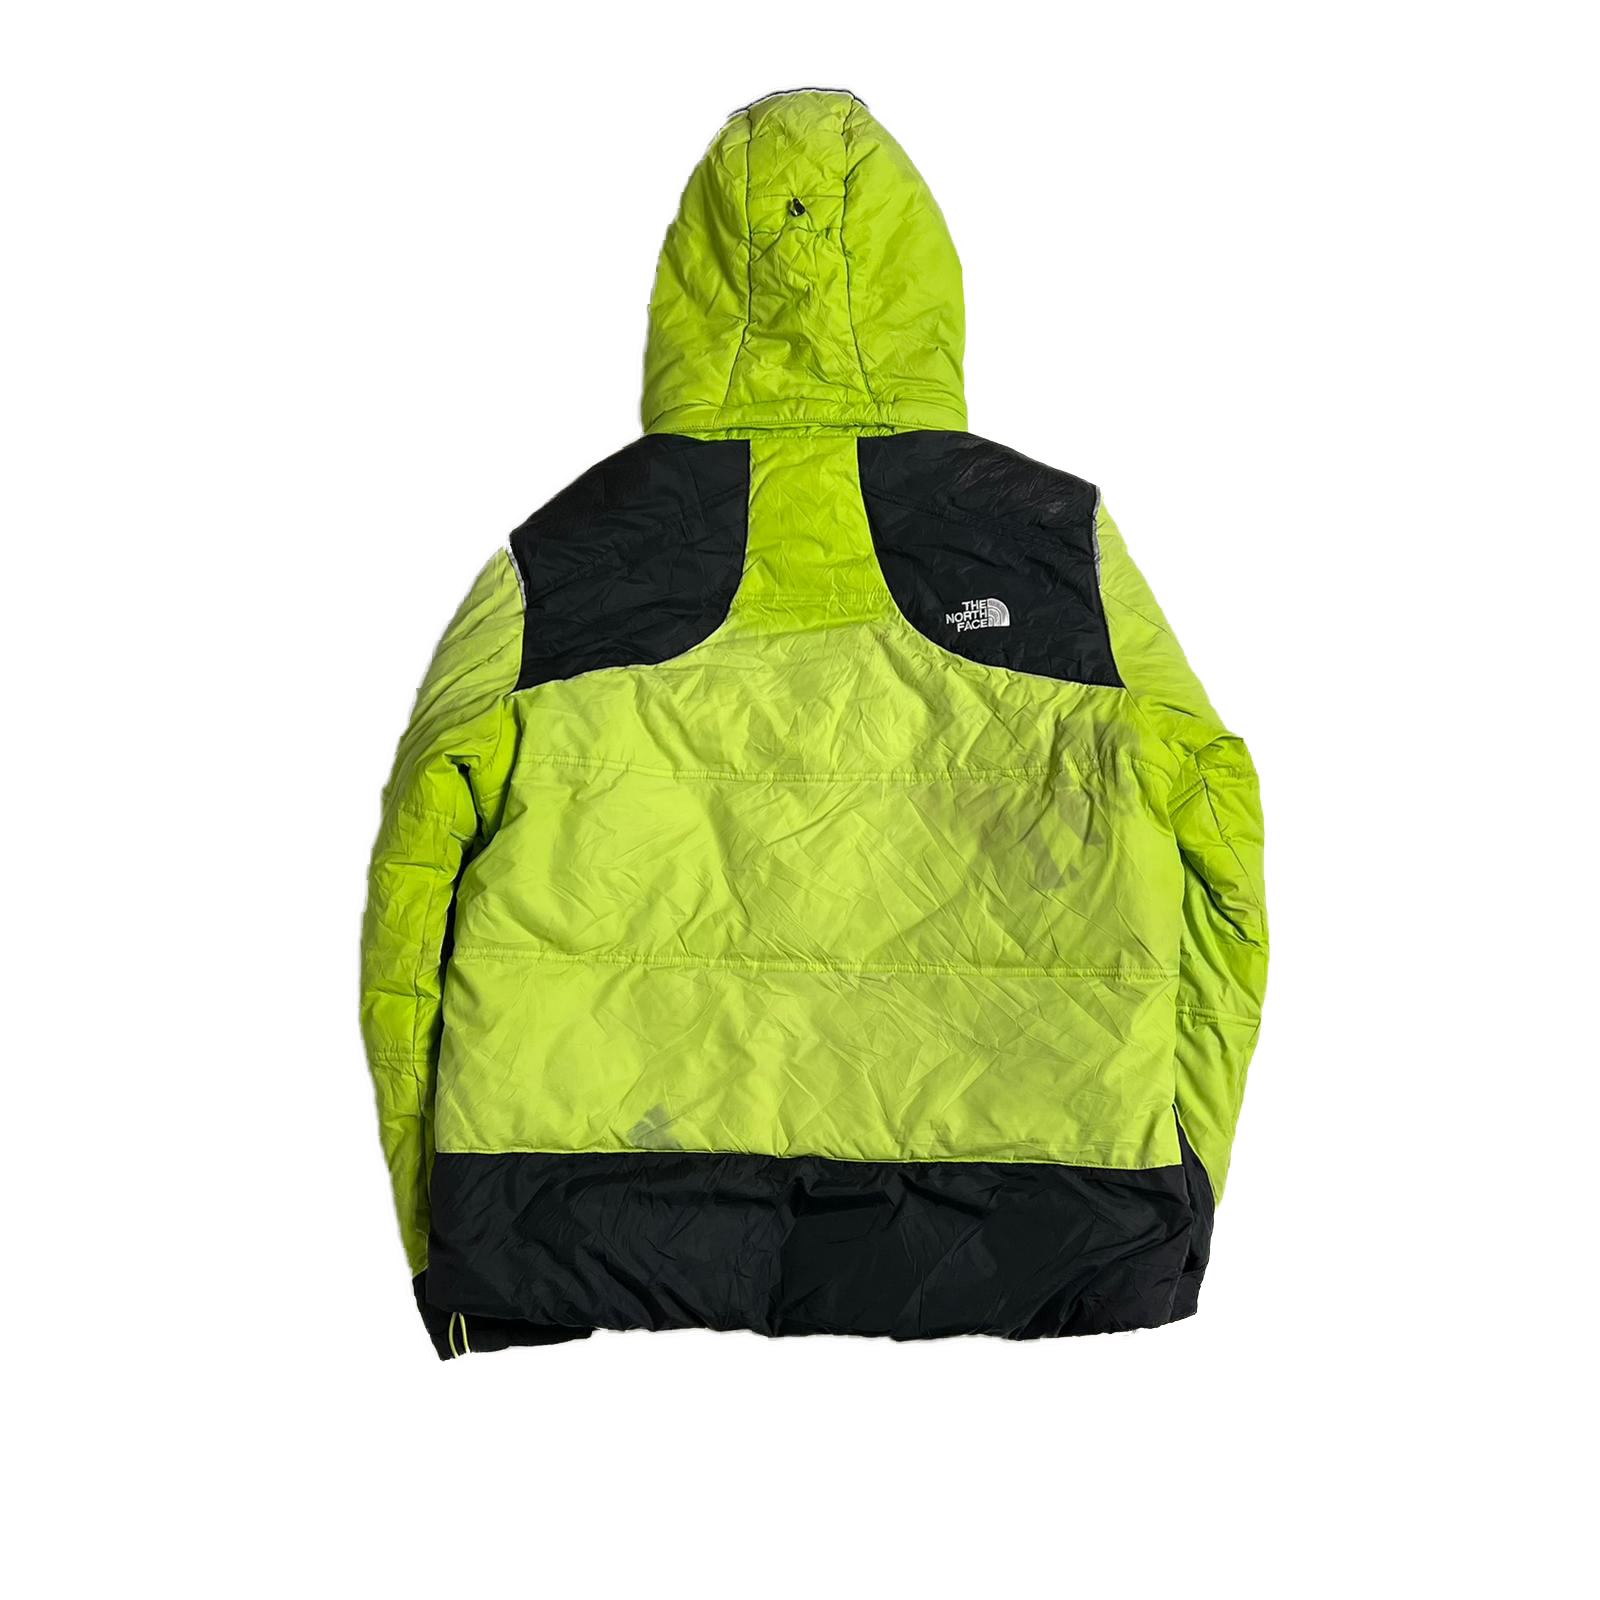 The North Face puffer